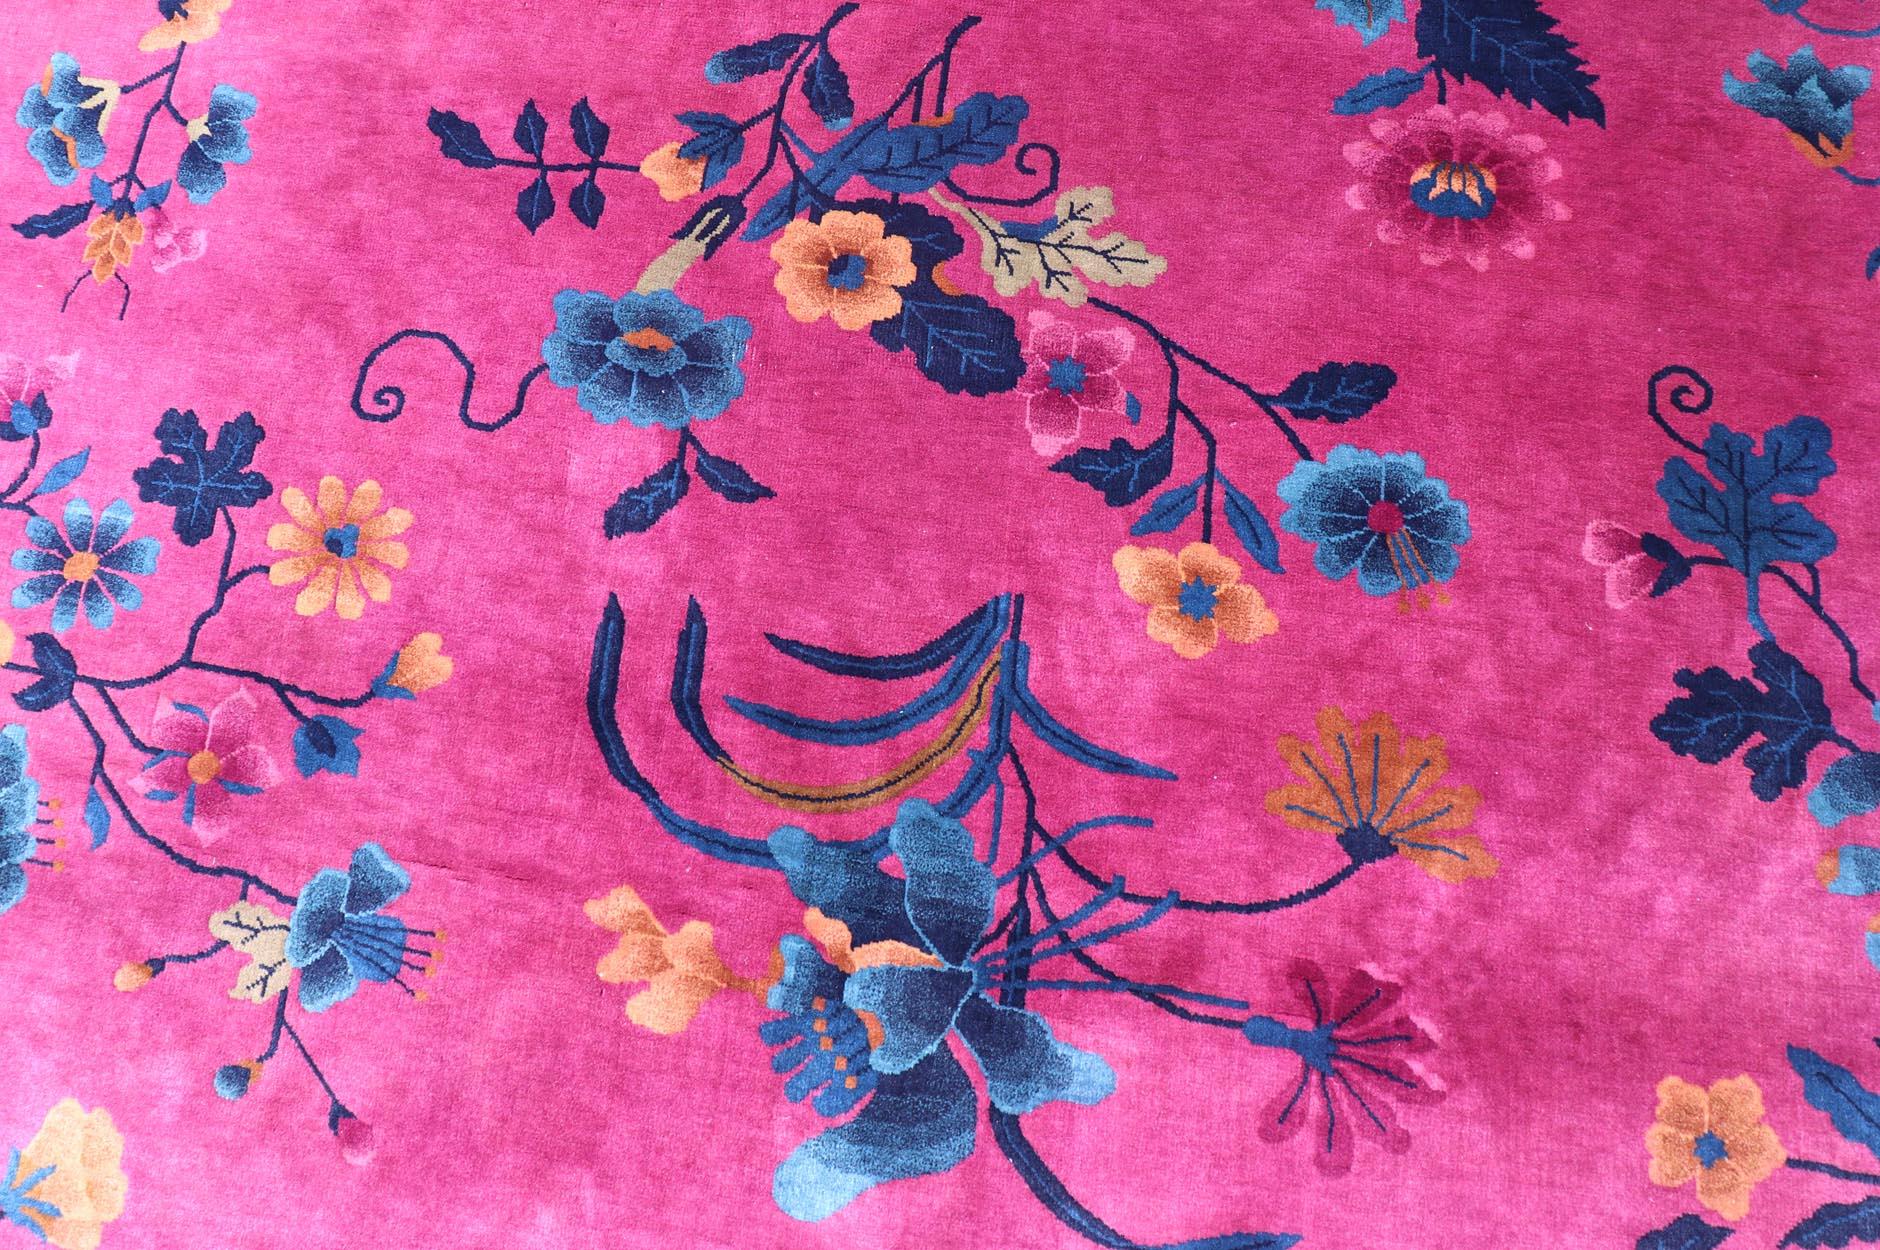 Magenta Background Chinese Art Deco Rug with Large Vining Flowers and Leaves. Keivan Woven Arts / rug X23-0802, country of origin / type: China / Art Deco, circa 1920.
Measures: 12'0 x 14'8 
Alive with color, this beautiful antique Art Deco Chinese